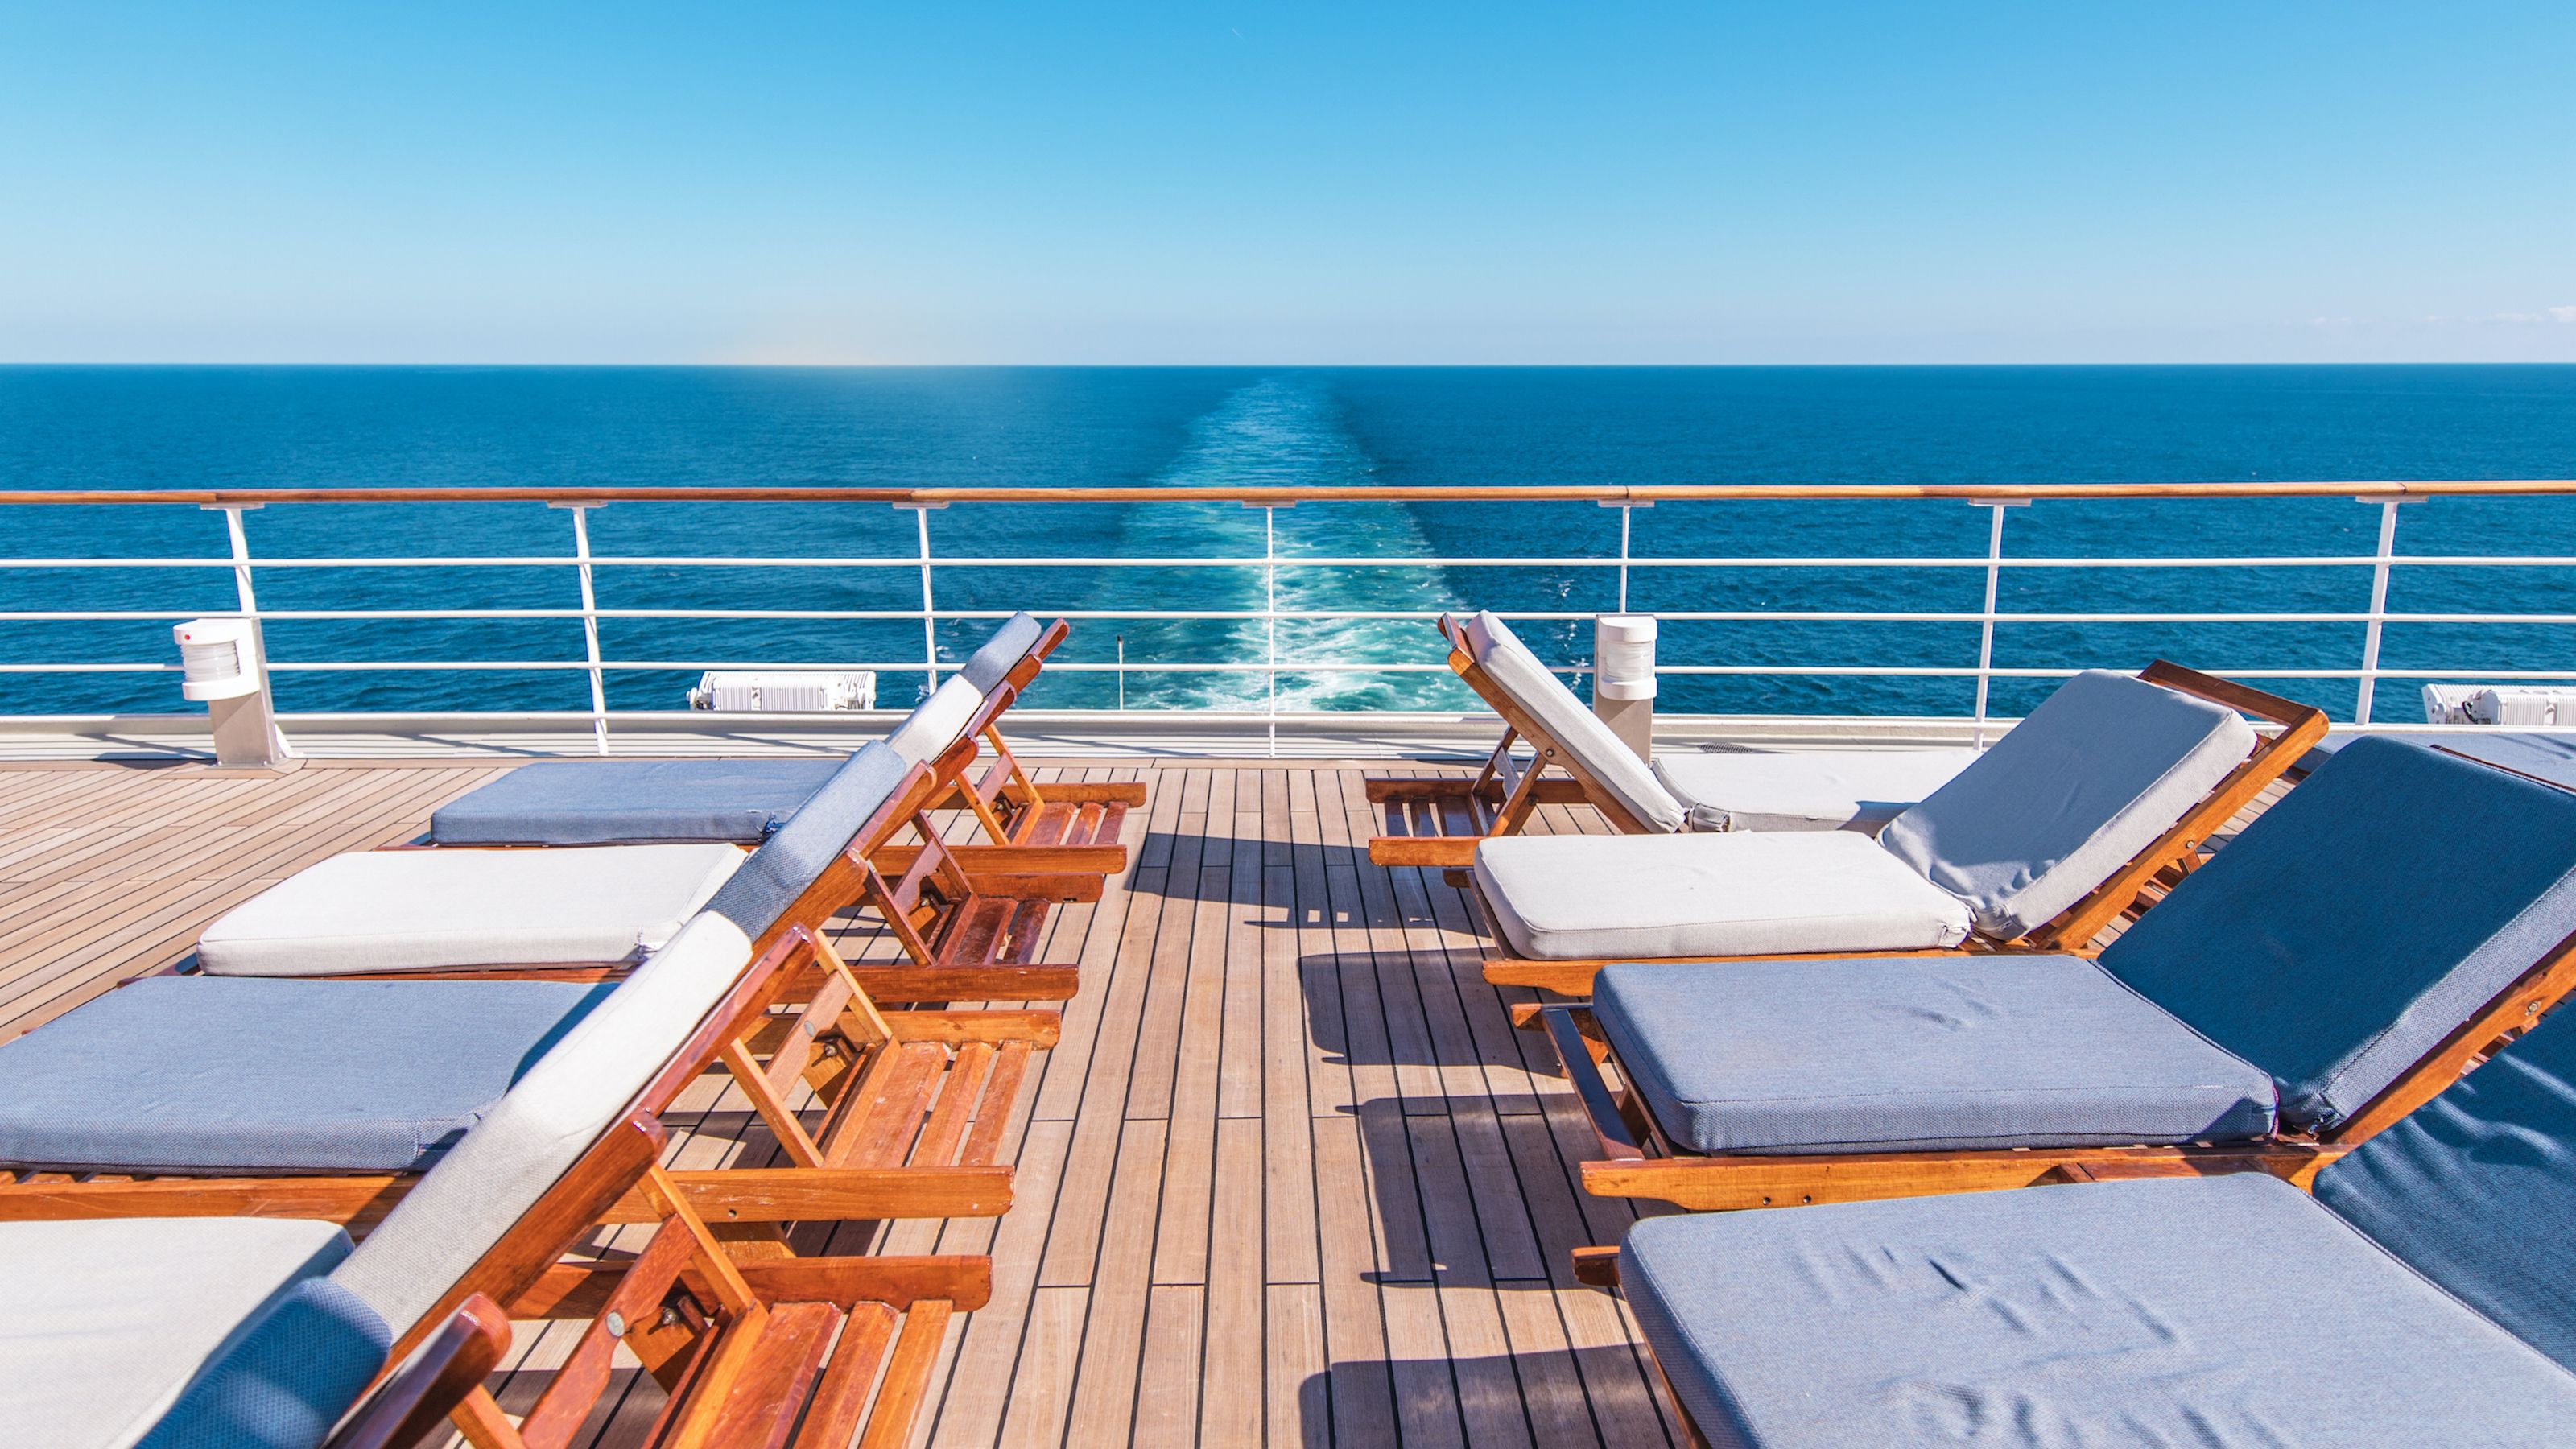 11 Best Duty-Free Shopping Deals on a Cruise Ship - Life Well Cruised